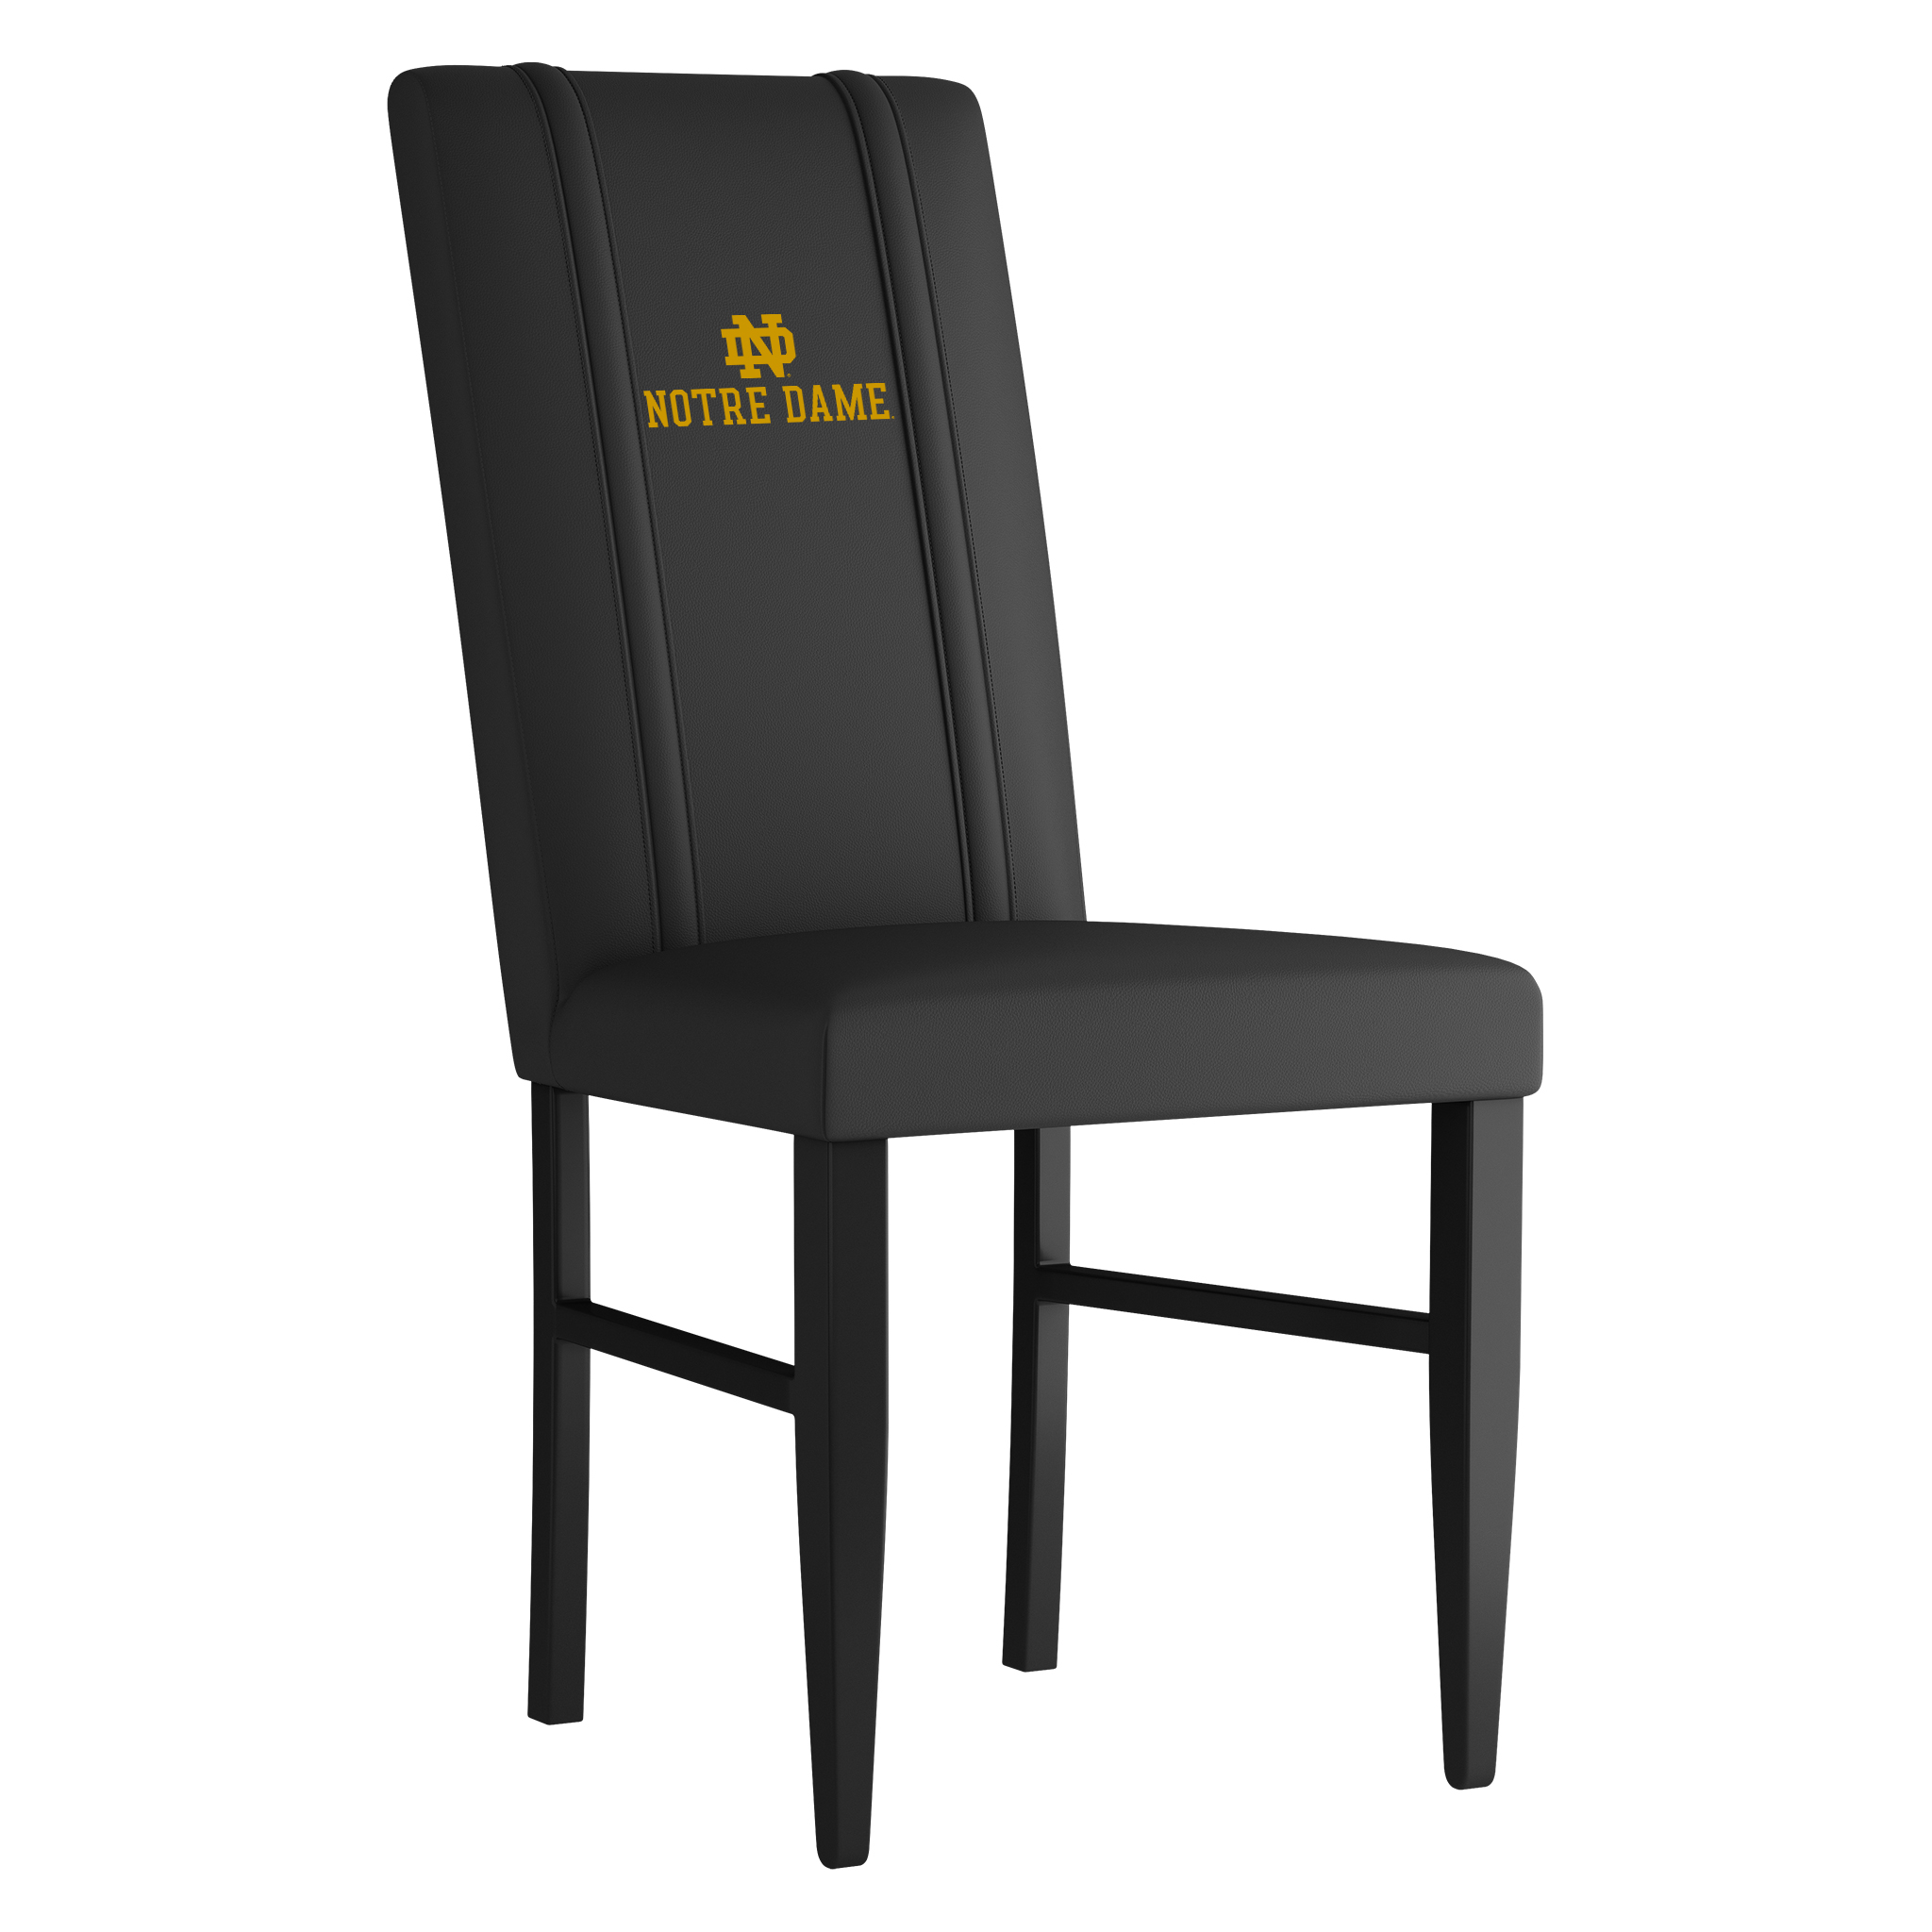 Notre Dame Side Chair 2000 With Notre Dame Wordmark Logo